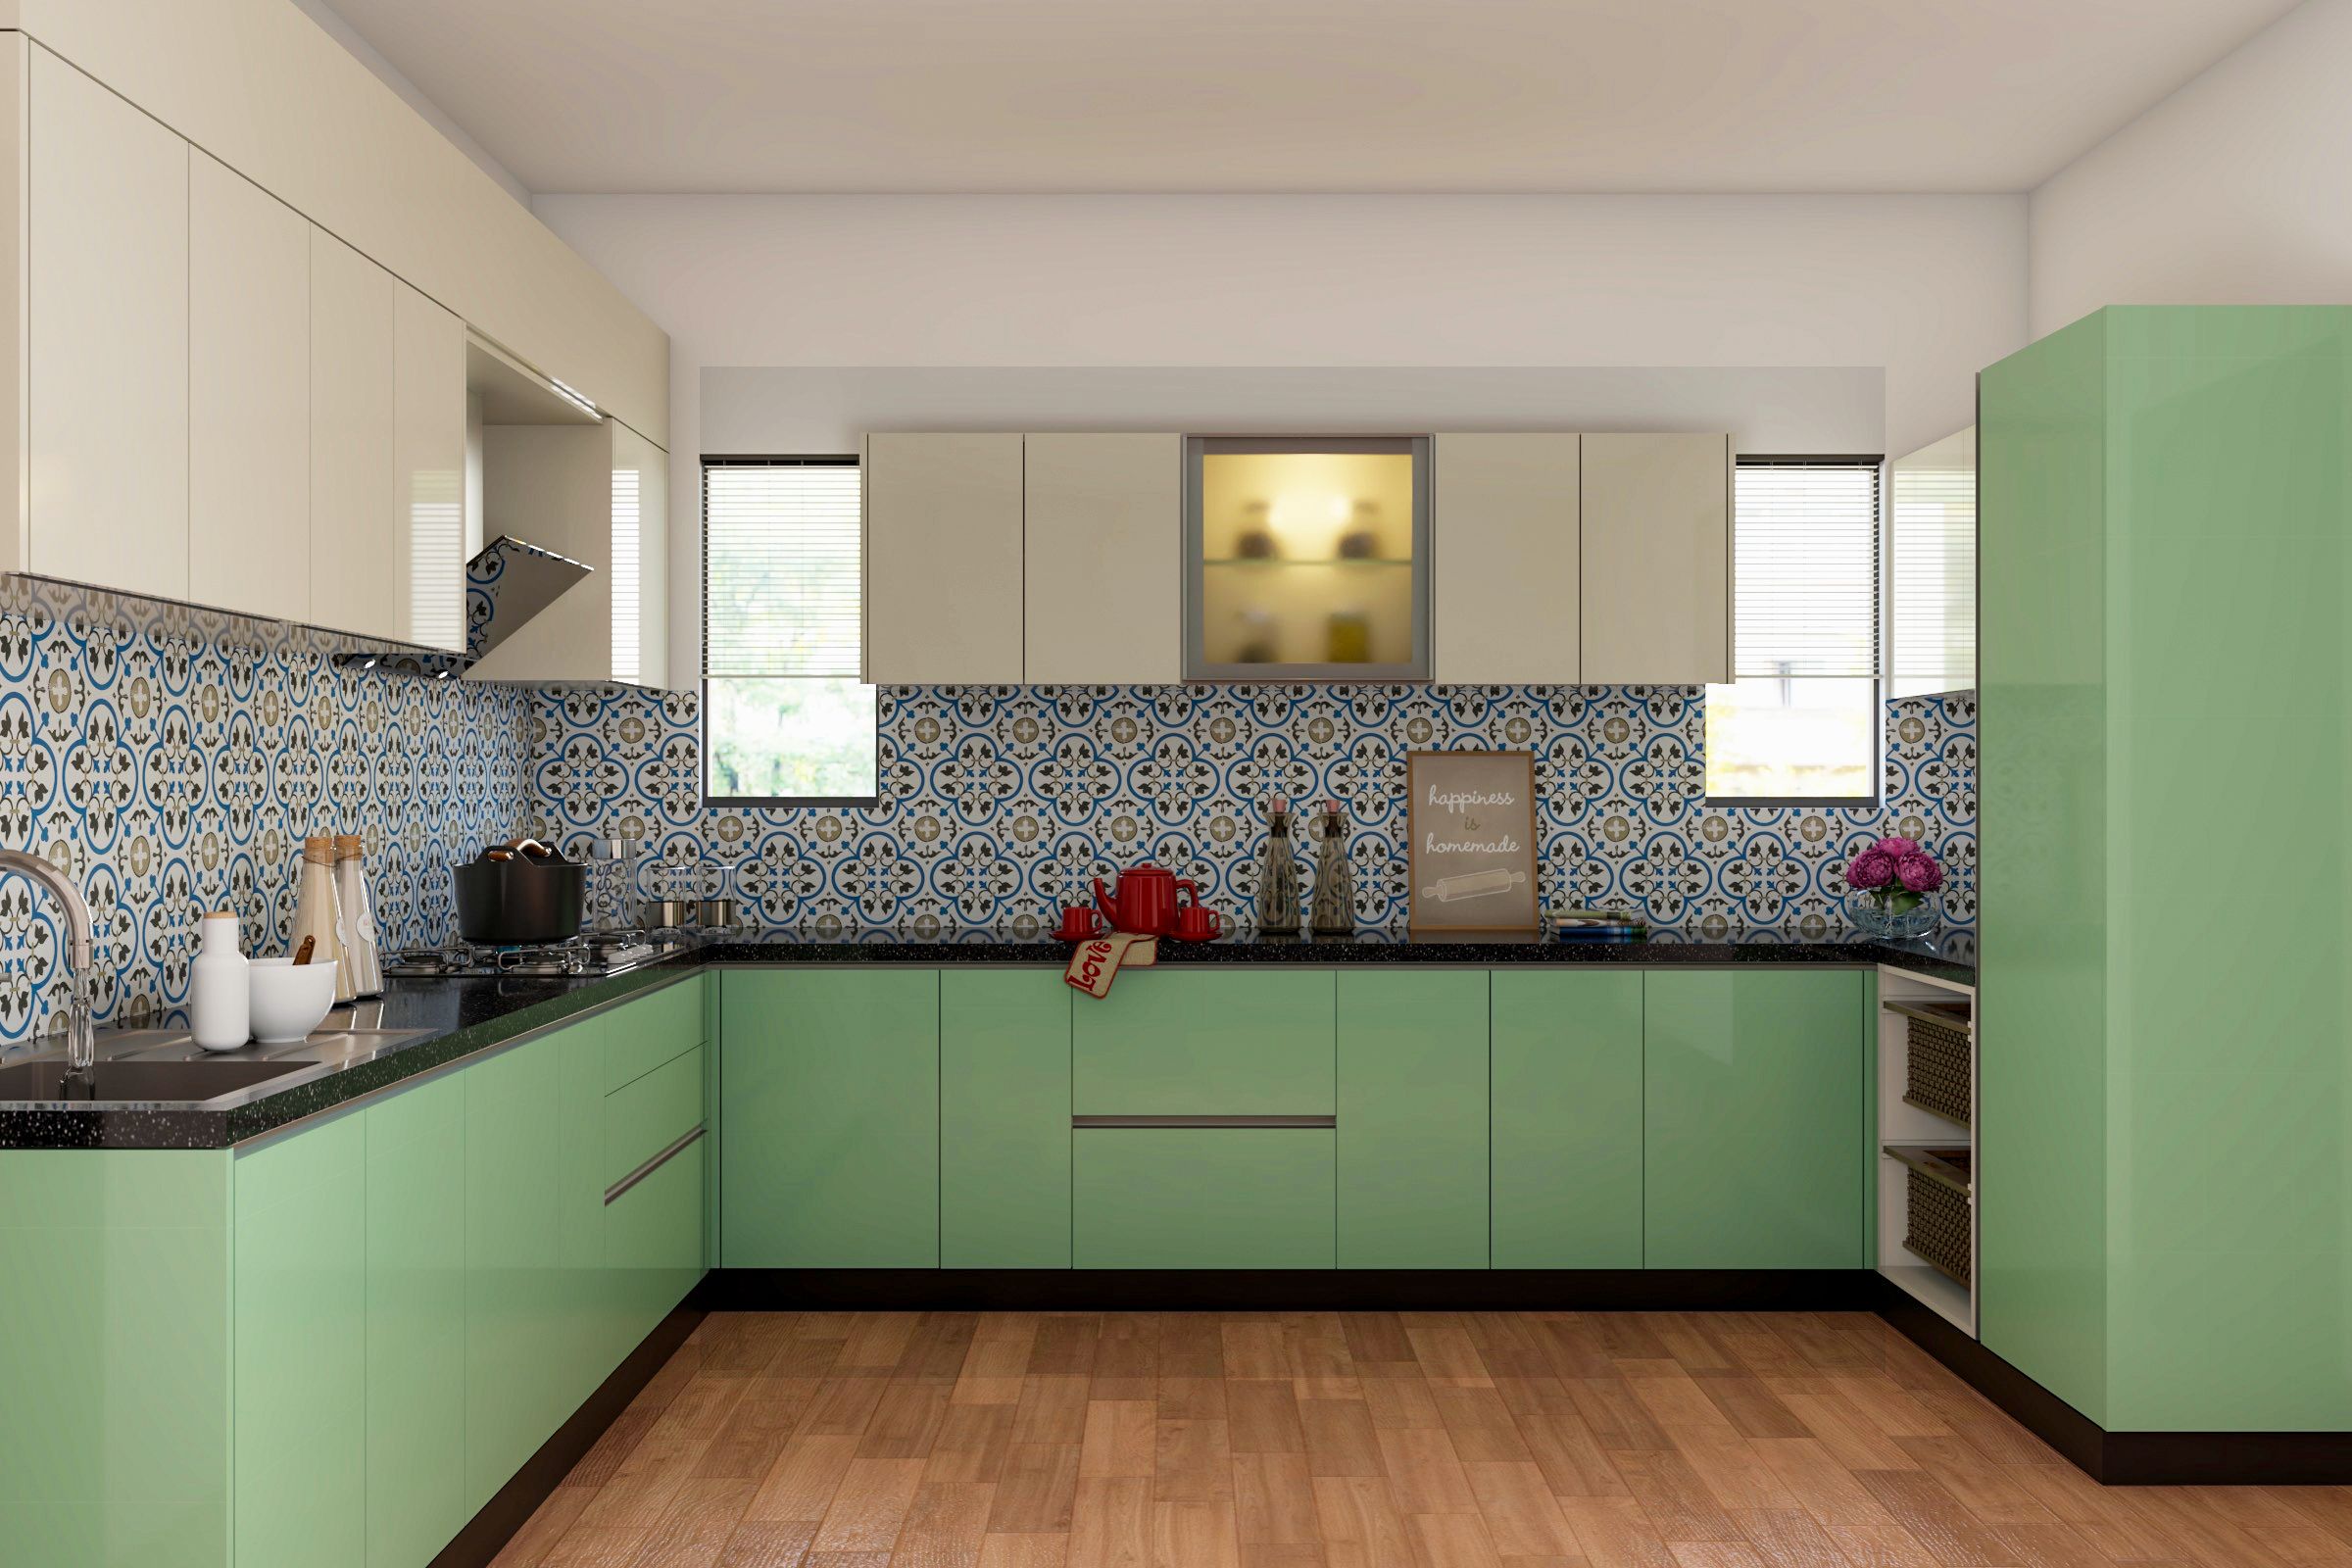 Spacious Light Green Modular Kitchen Design With Frosted Glass